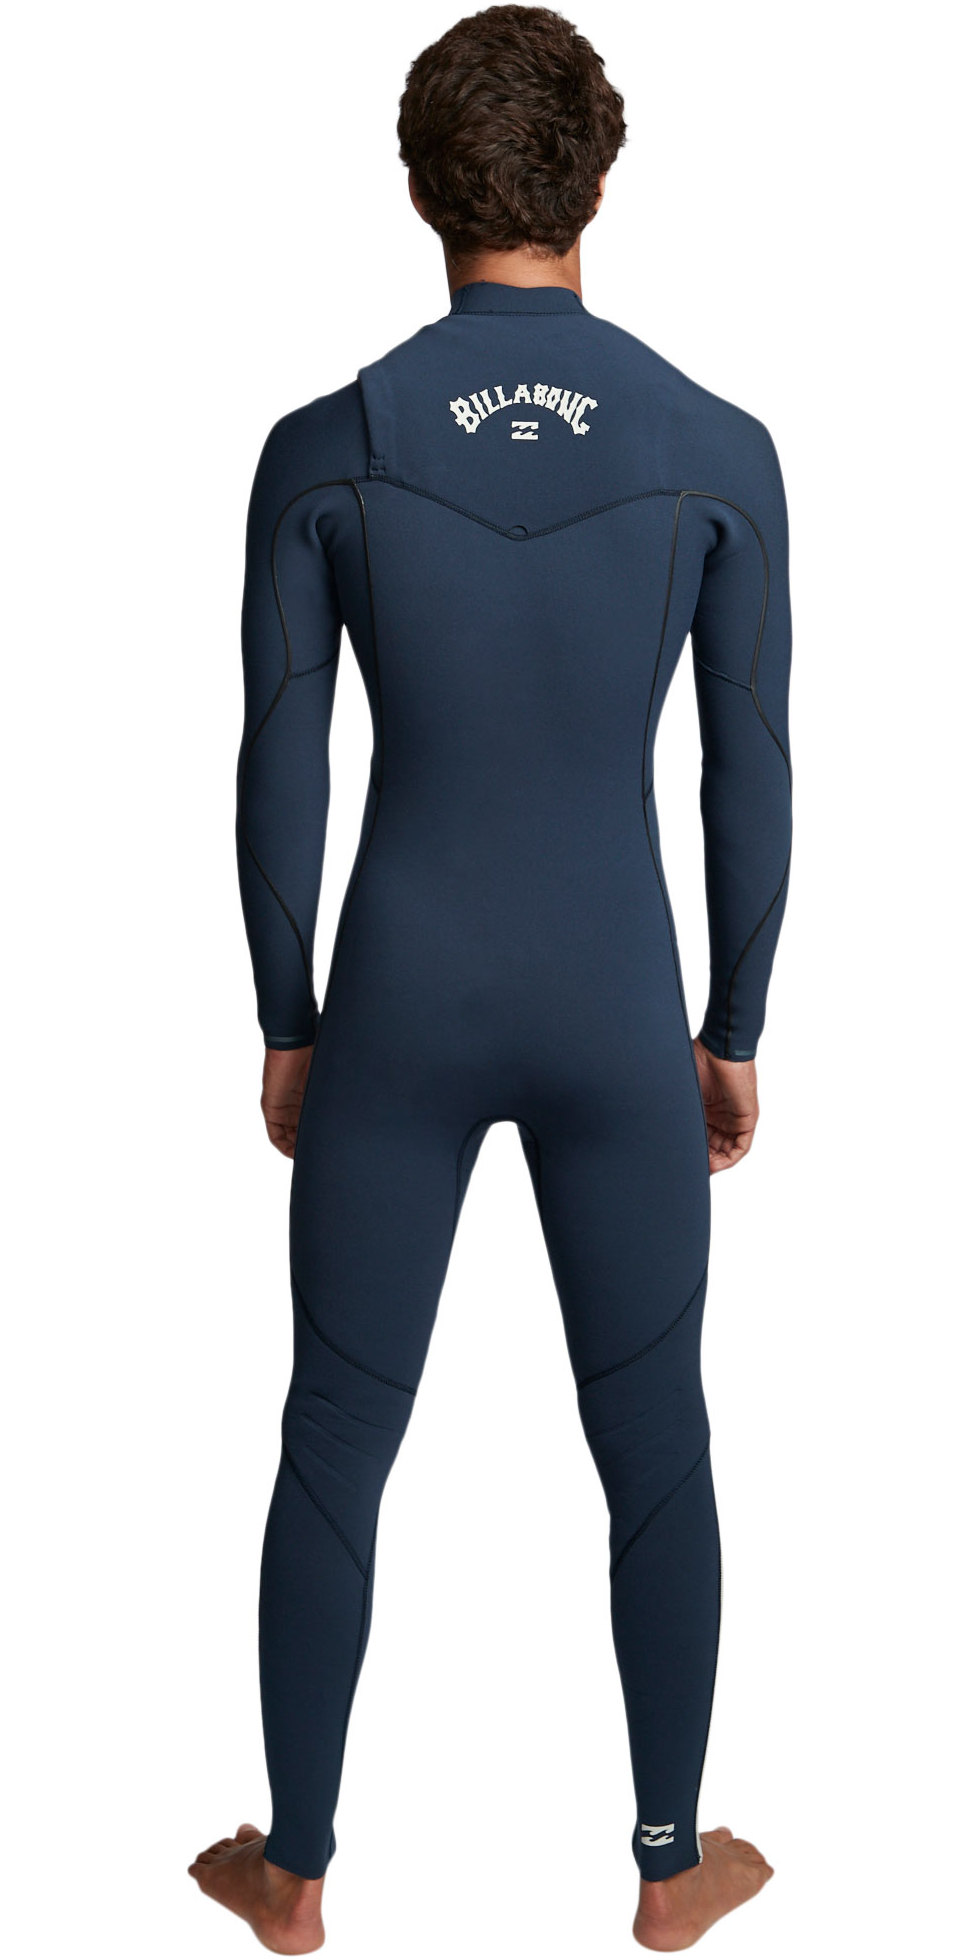 19 Billabong Mens Furnace Comp 4 3mm Chest Zip Wetsuit Blue Q44m03 Wetsuits Watersports Outlet